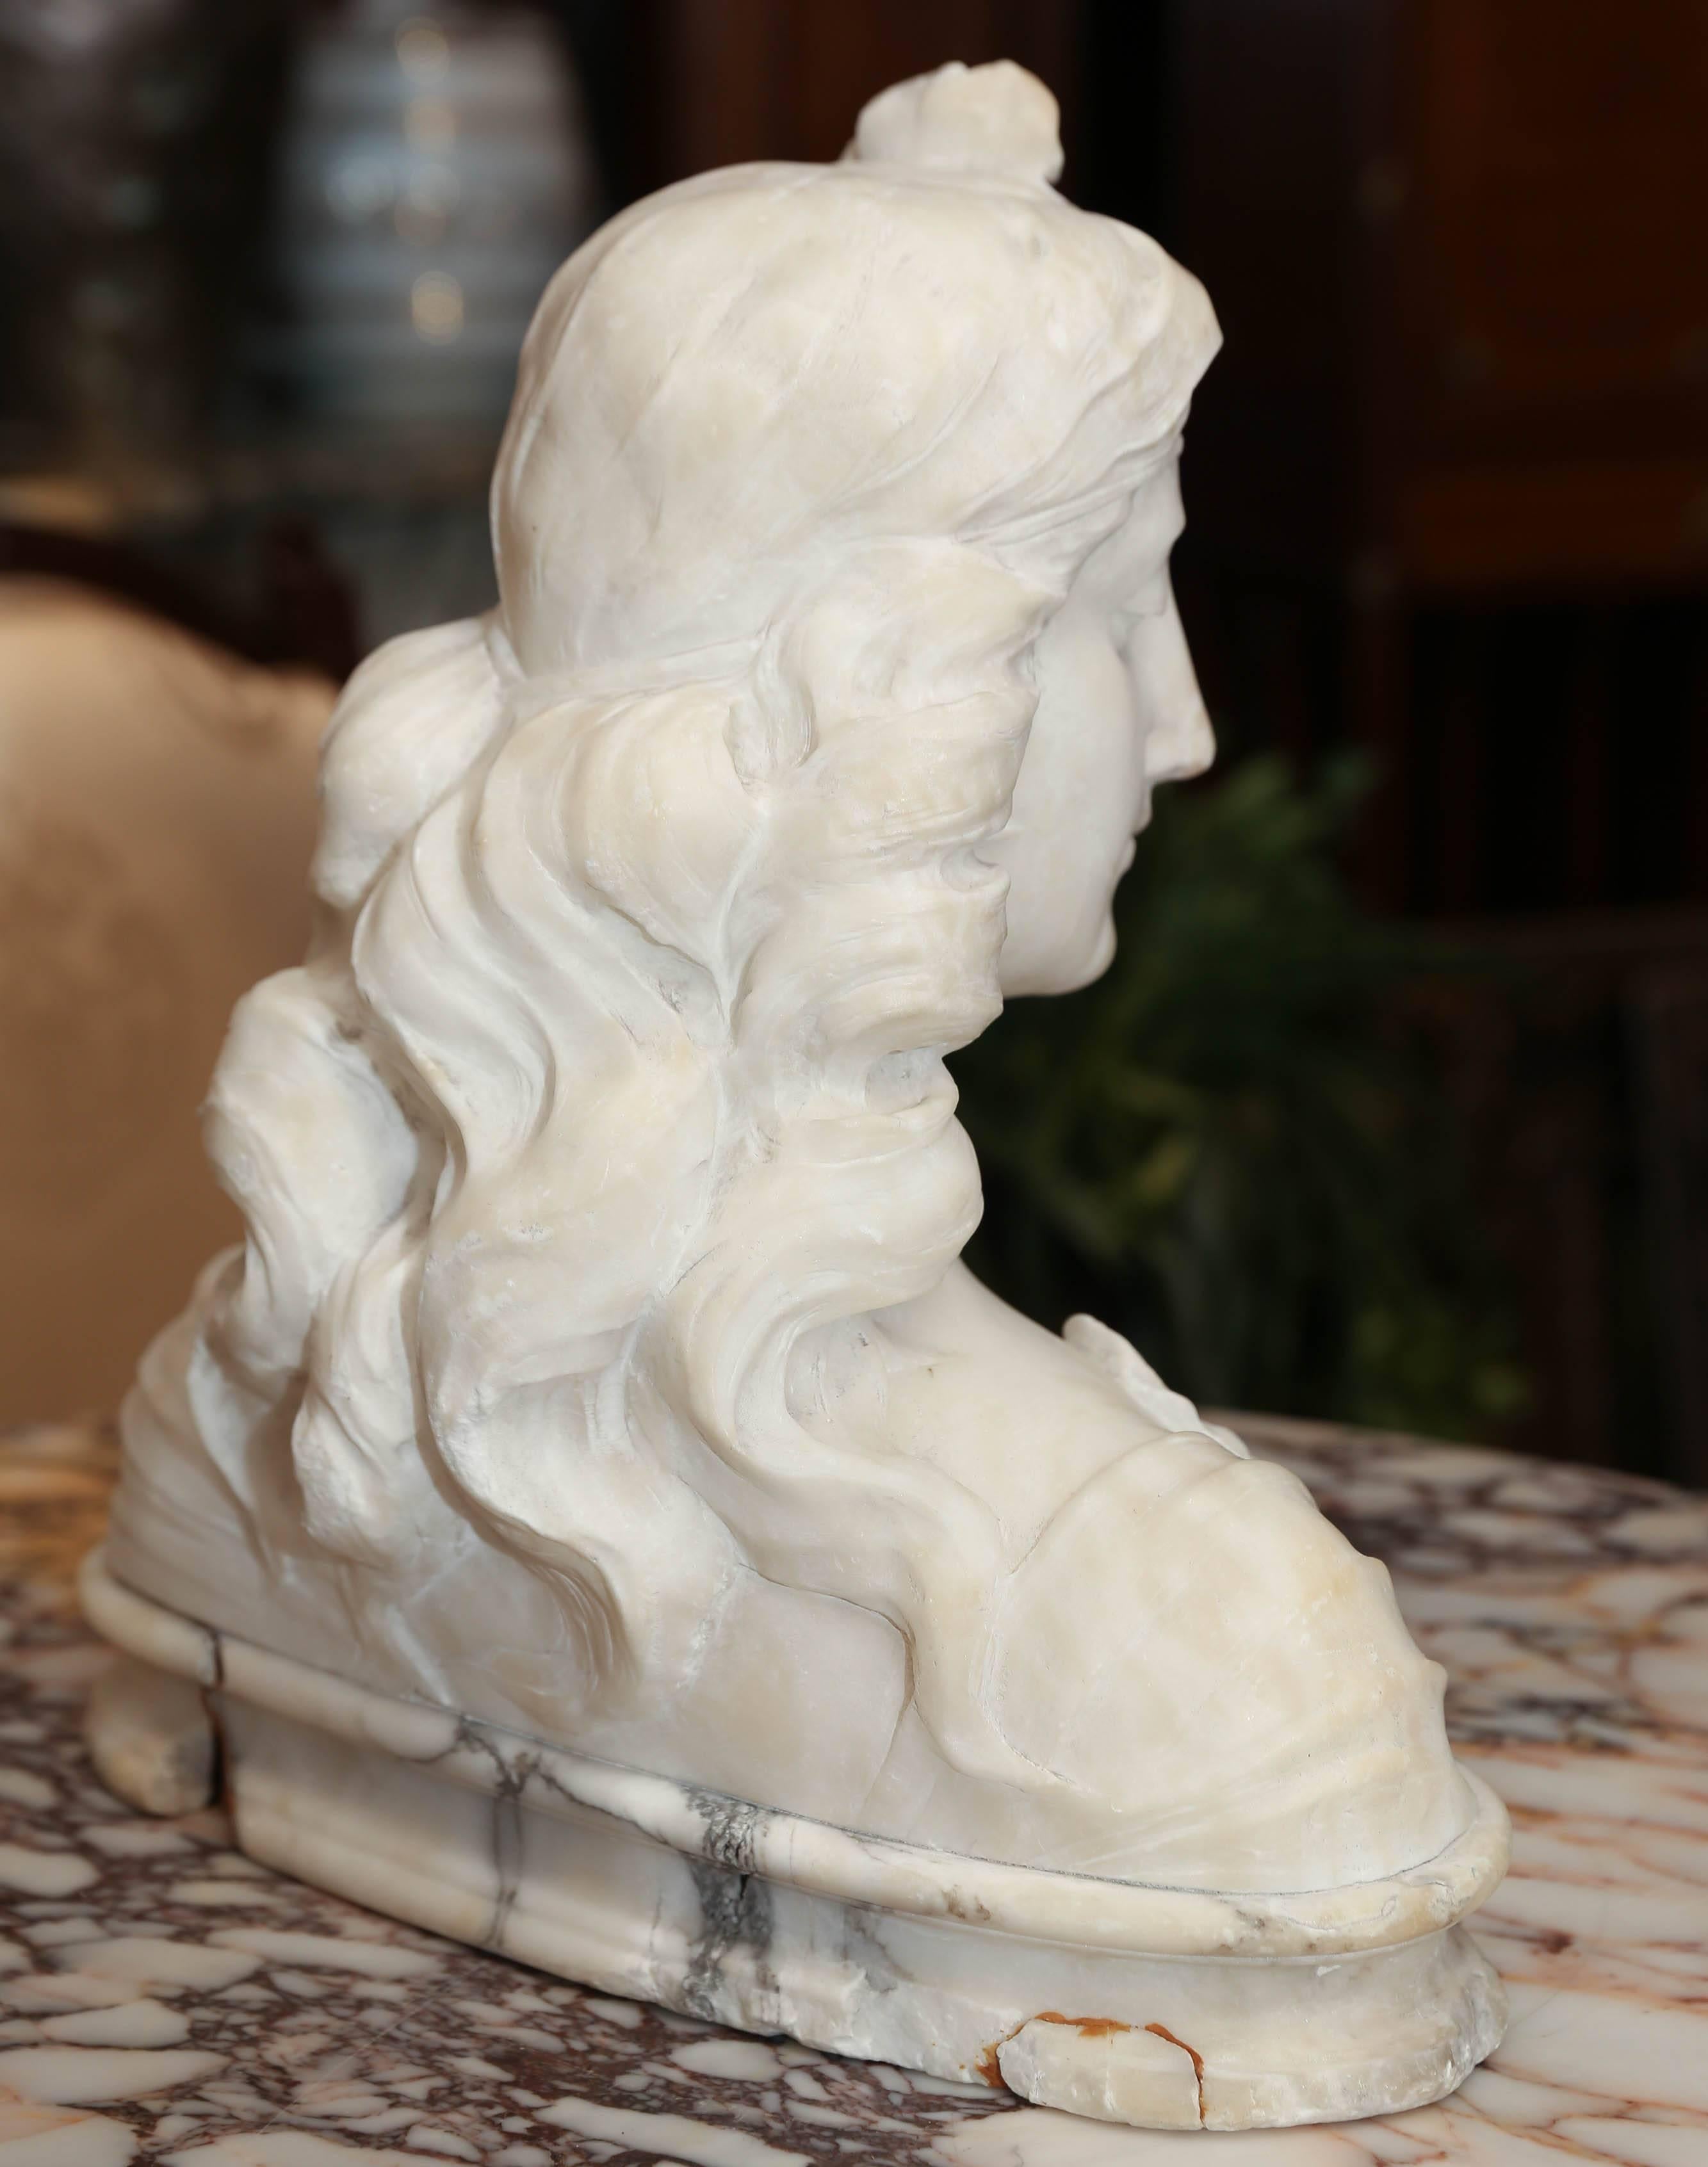 20th Century Art Nouveau Female Bust Carved in Carrara Marble